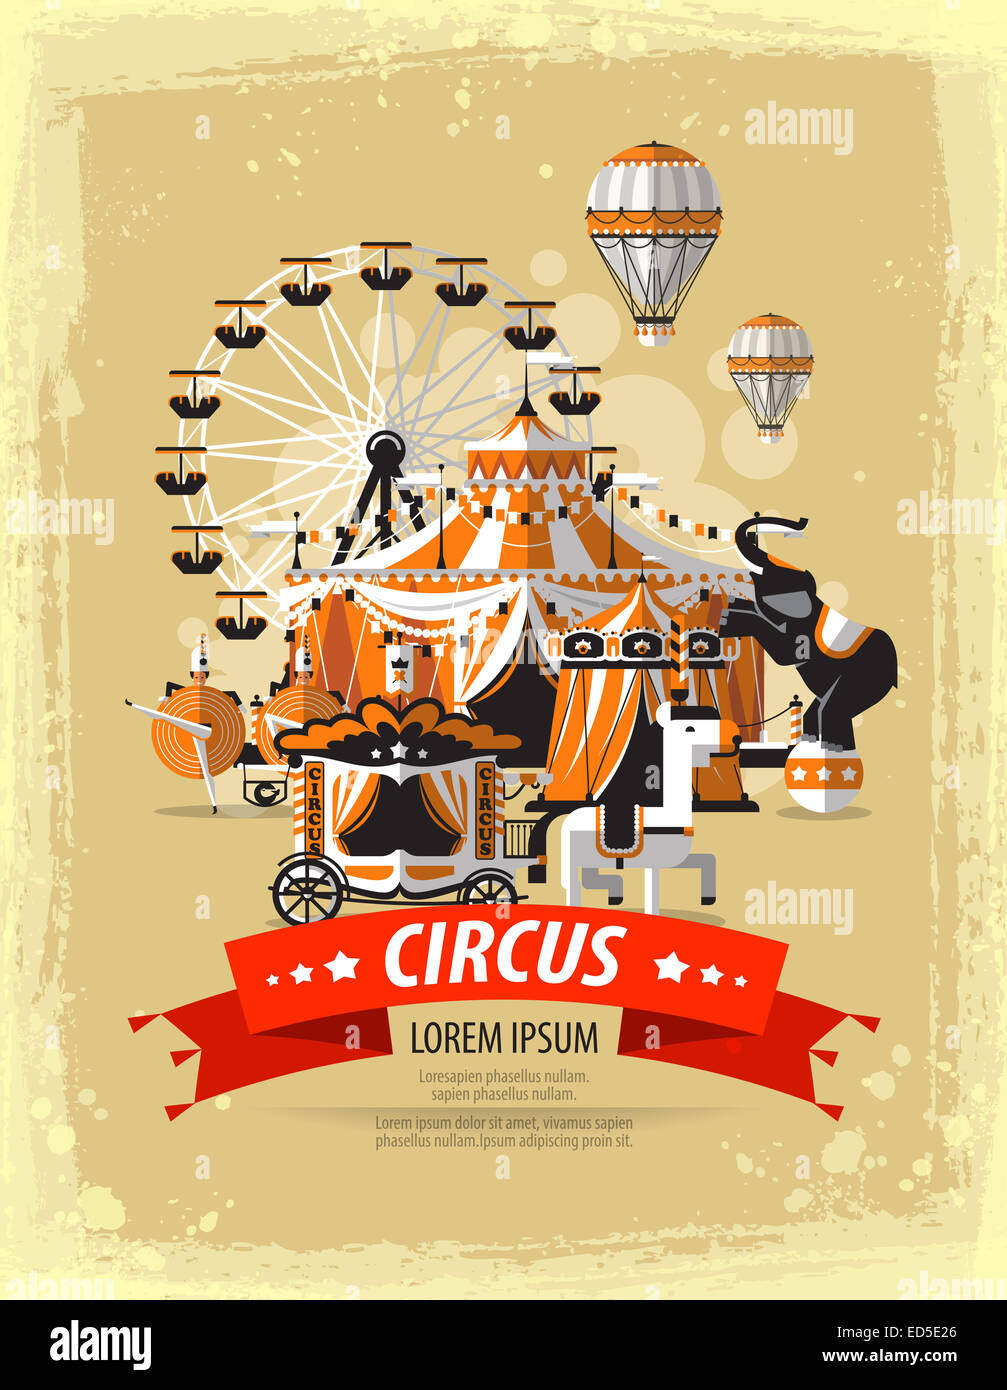 Cirque, expositions, carnaval. vector illustration Banque D'Images